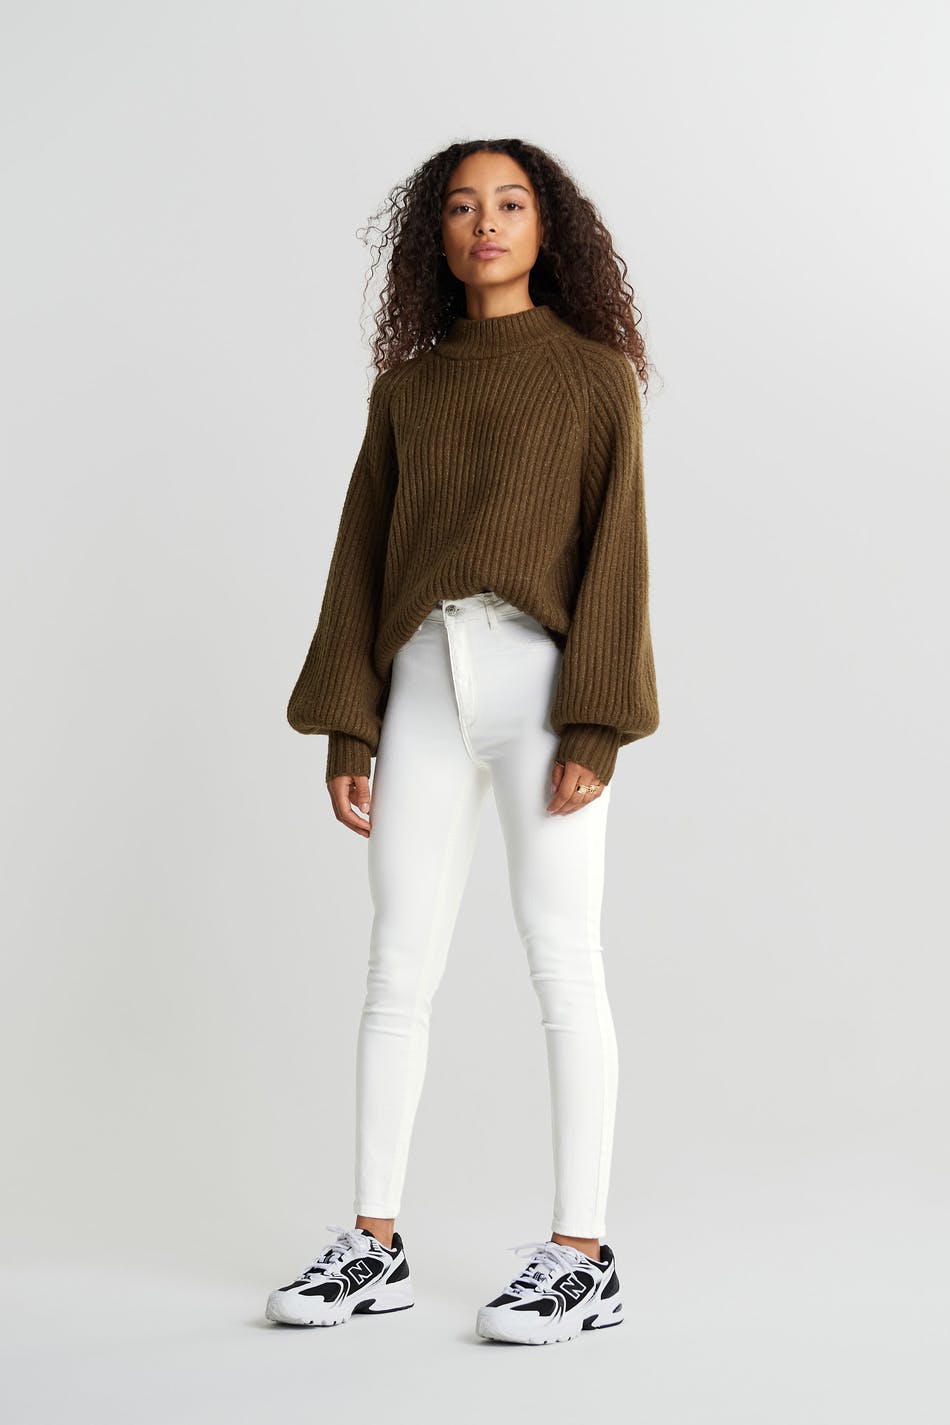 Molly petite high w jeans - Tricot